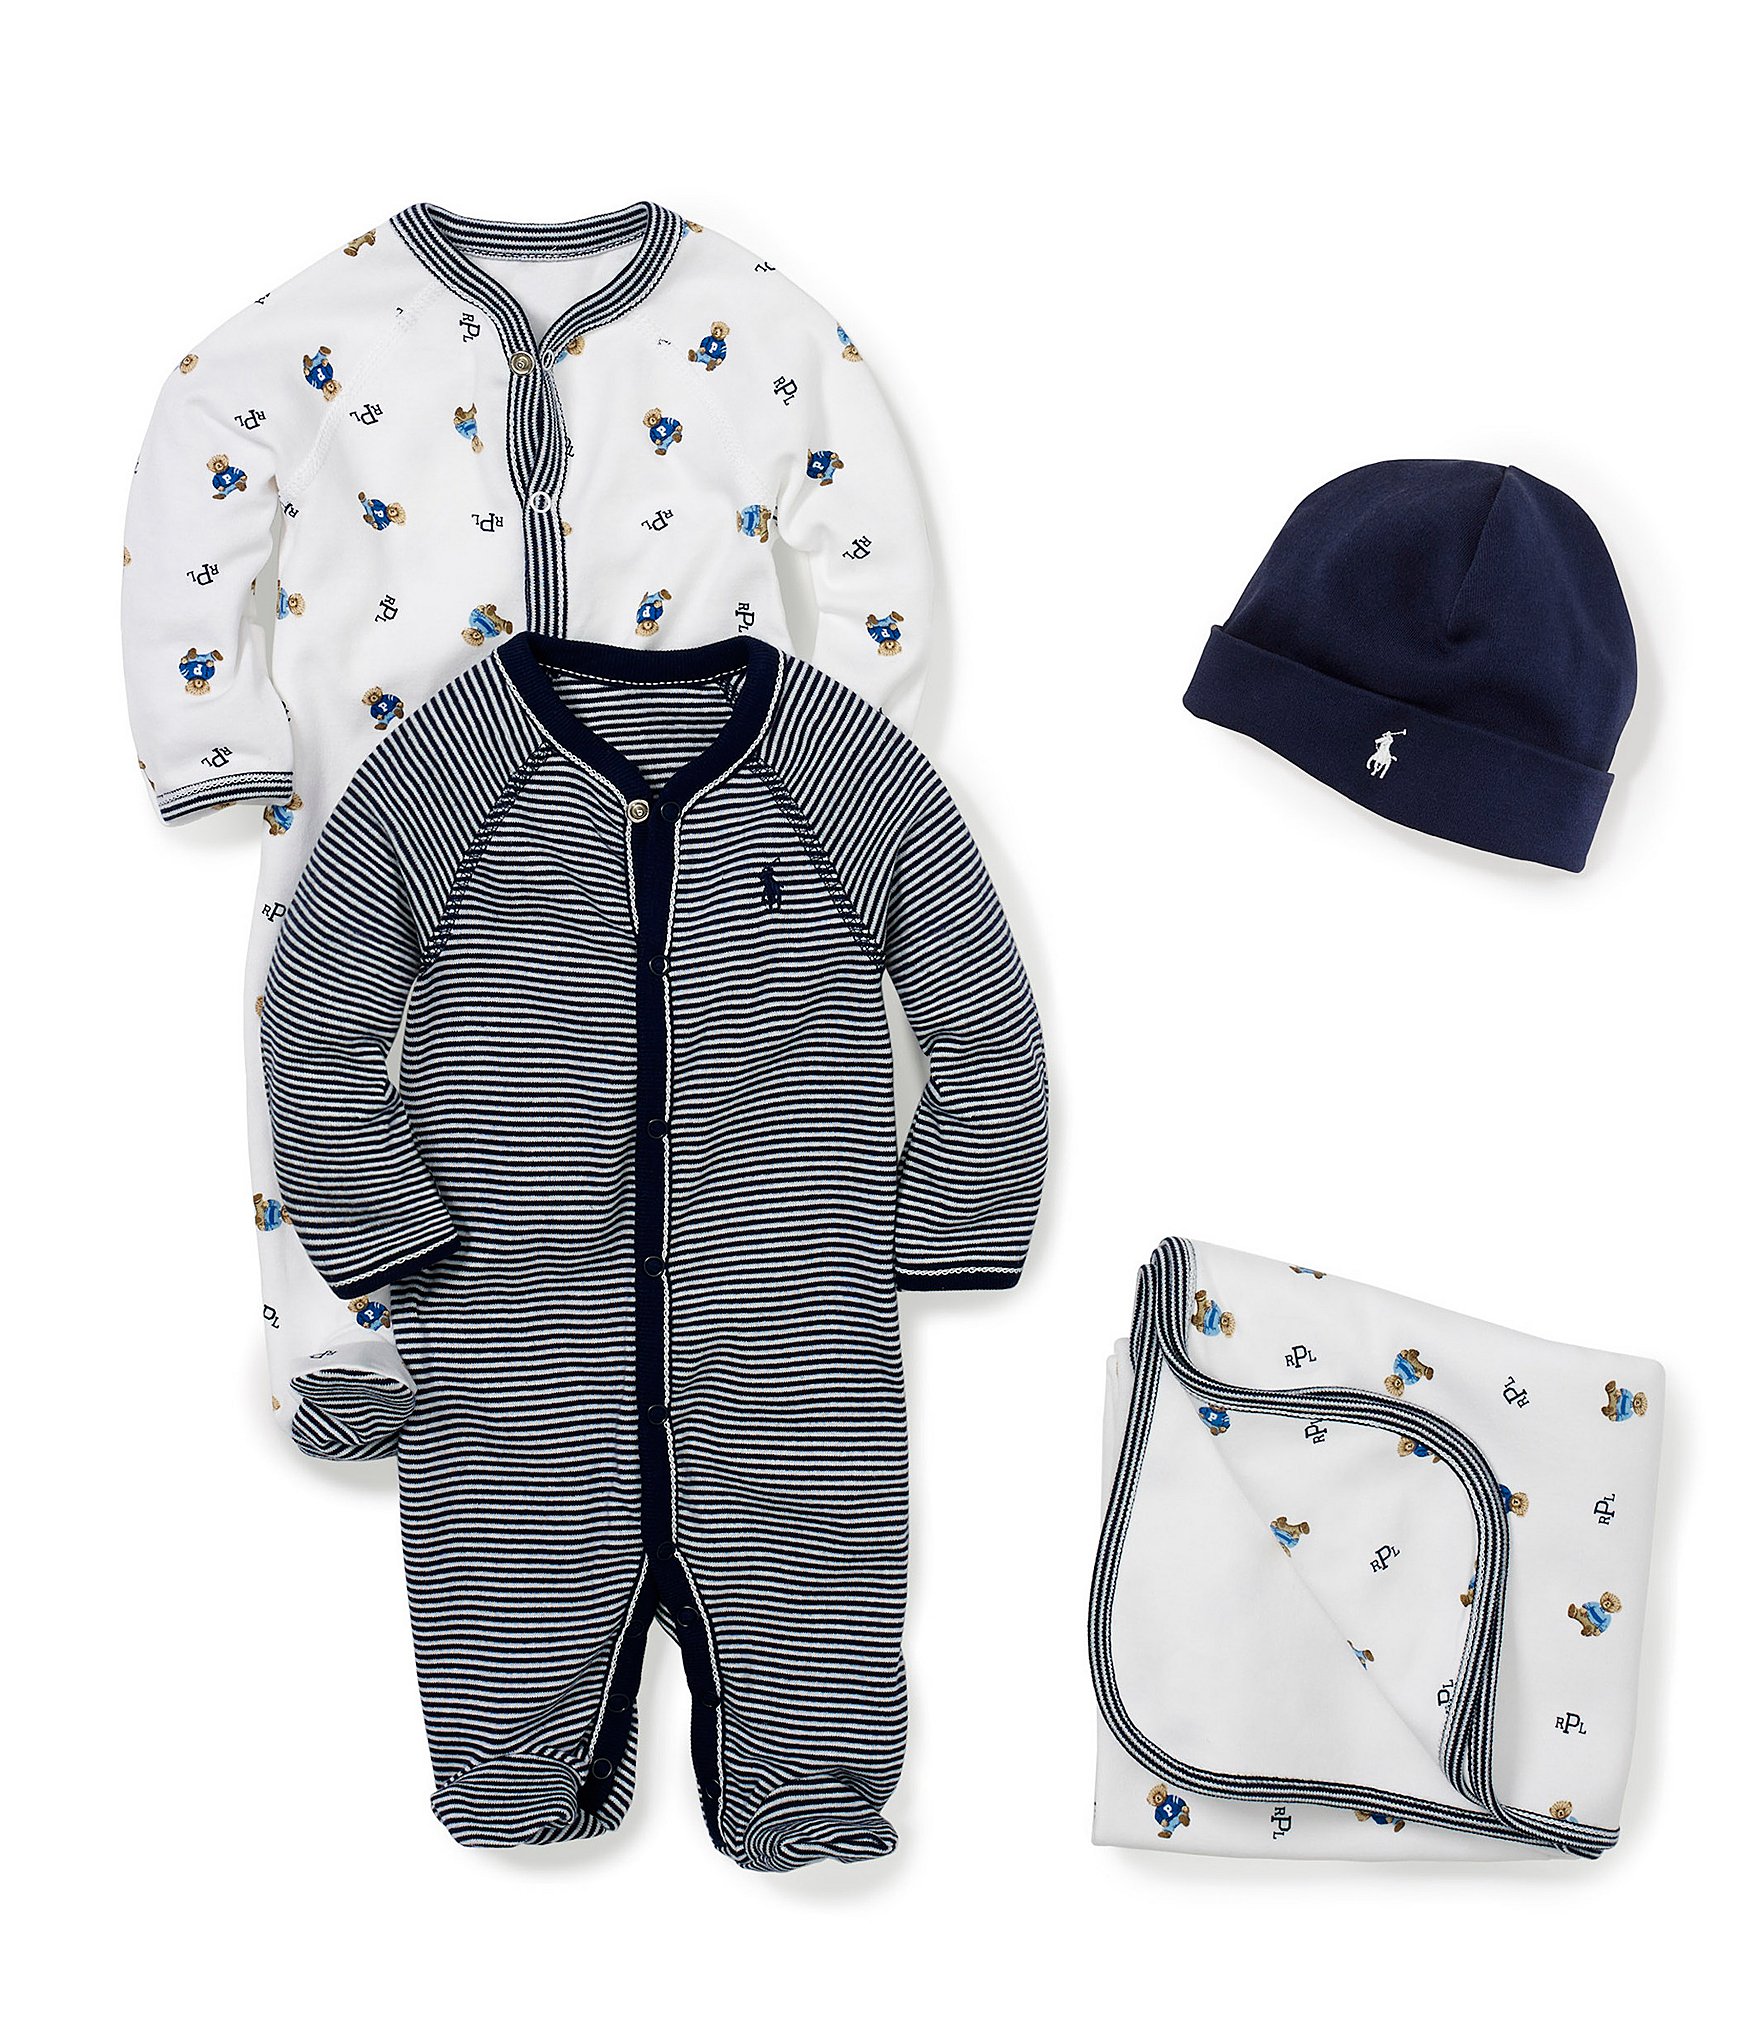 Ralph Lauren Kids Dillards focus for Awesome Dillards Baby Boy Clothes you should look